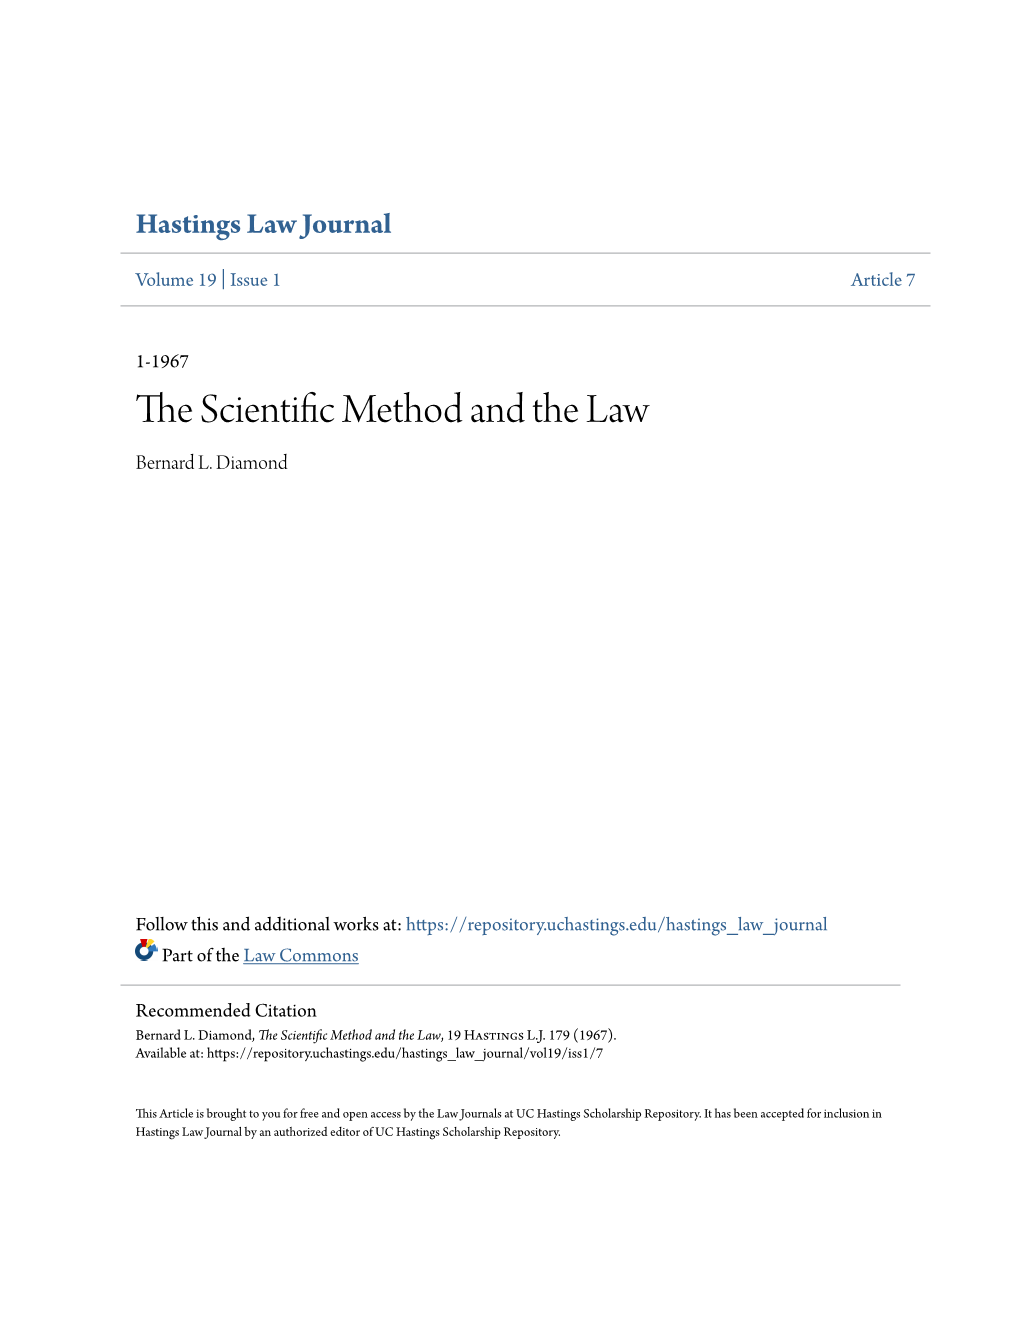 THE SCIENTIFIC METHOD and the LAW by Bemvam L